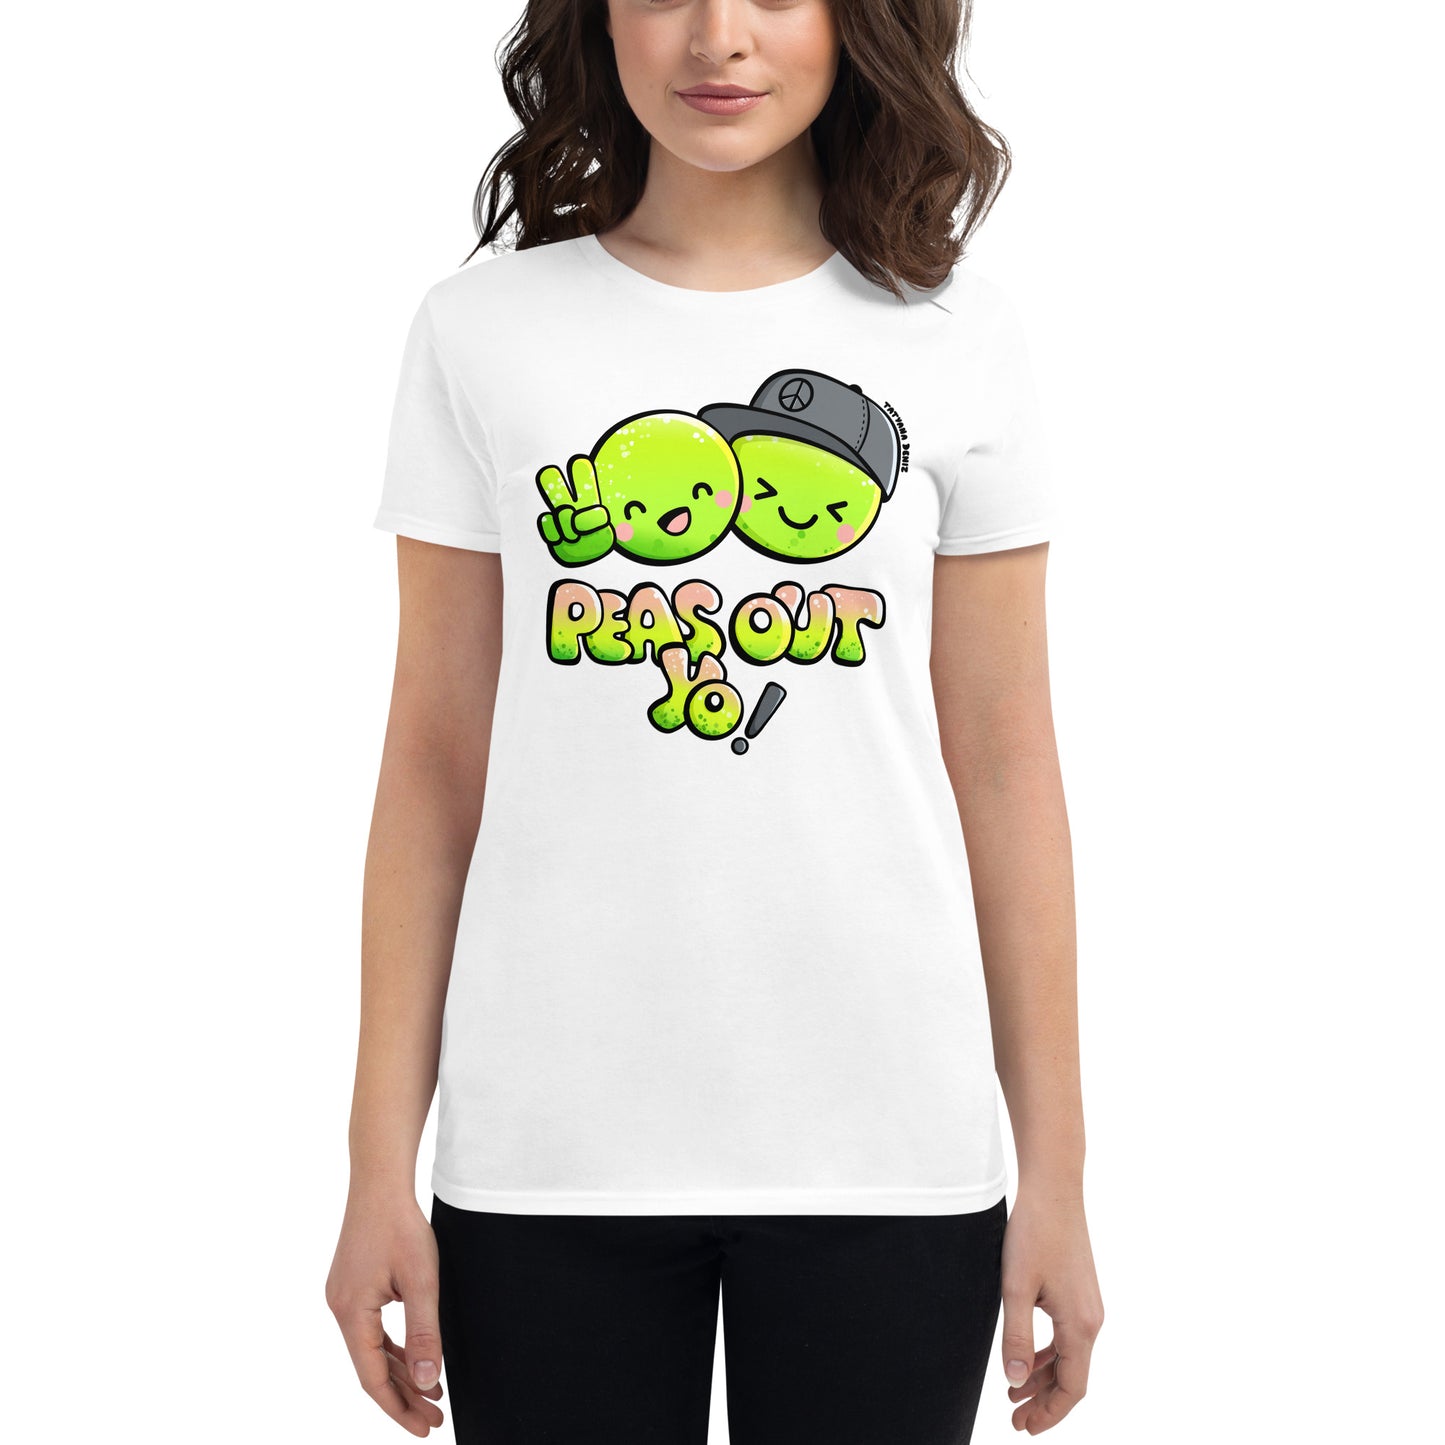 Peas Out – Funny Kawaii Graffiti Fitted T-shirt